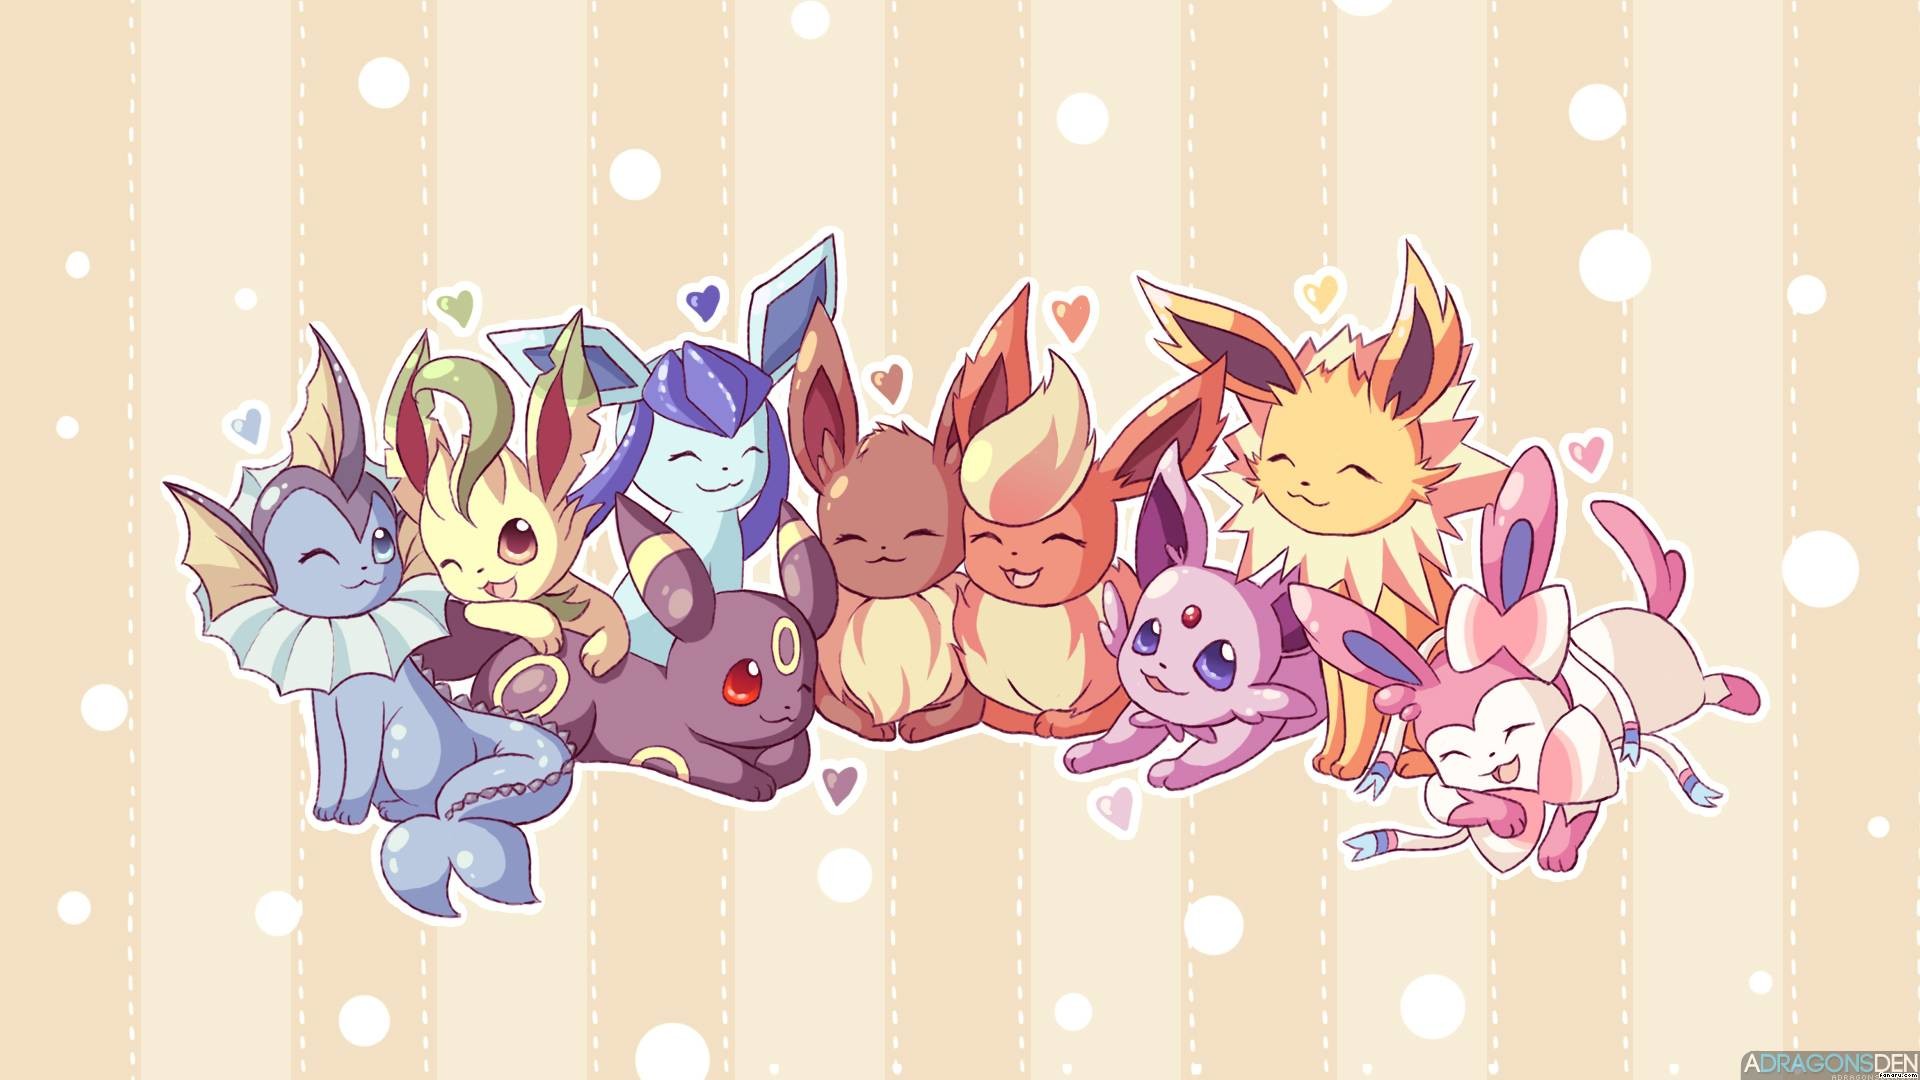 Cutest Pokemon images Cute Pokemon Wallpaper HD wallpaper and background photos